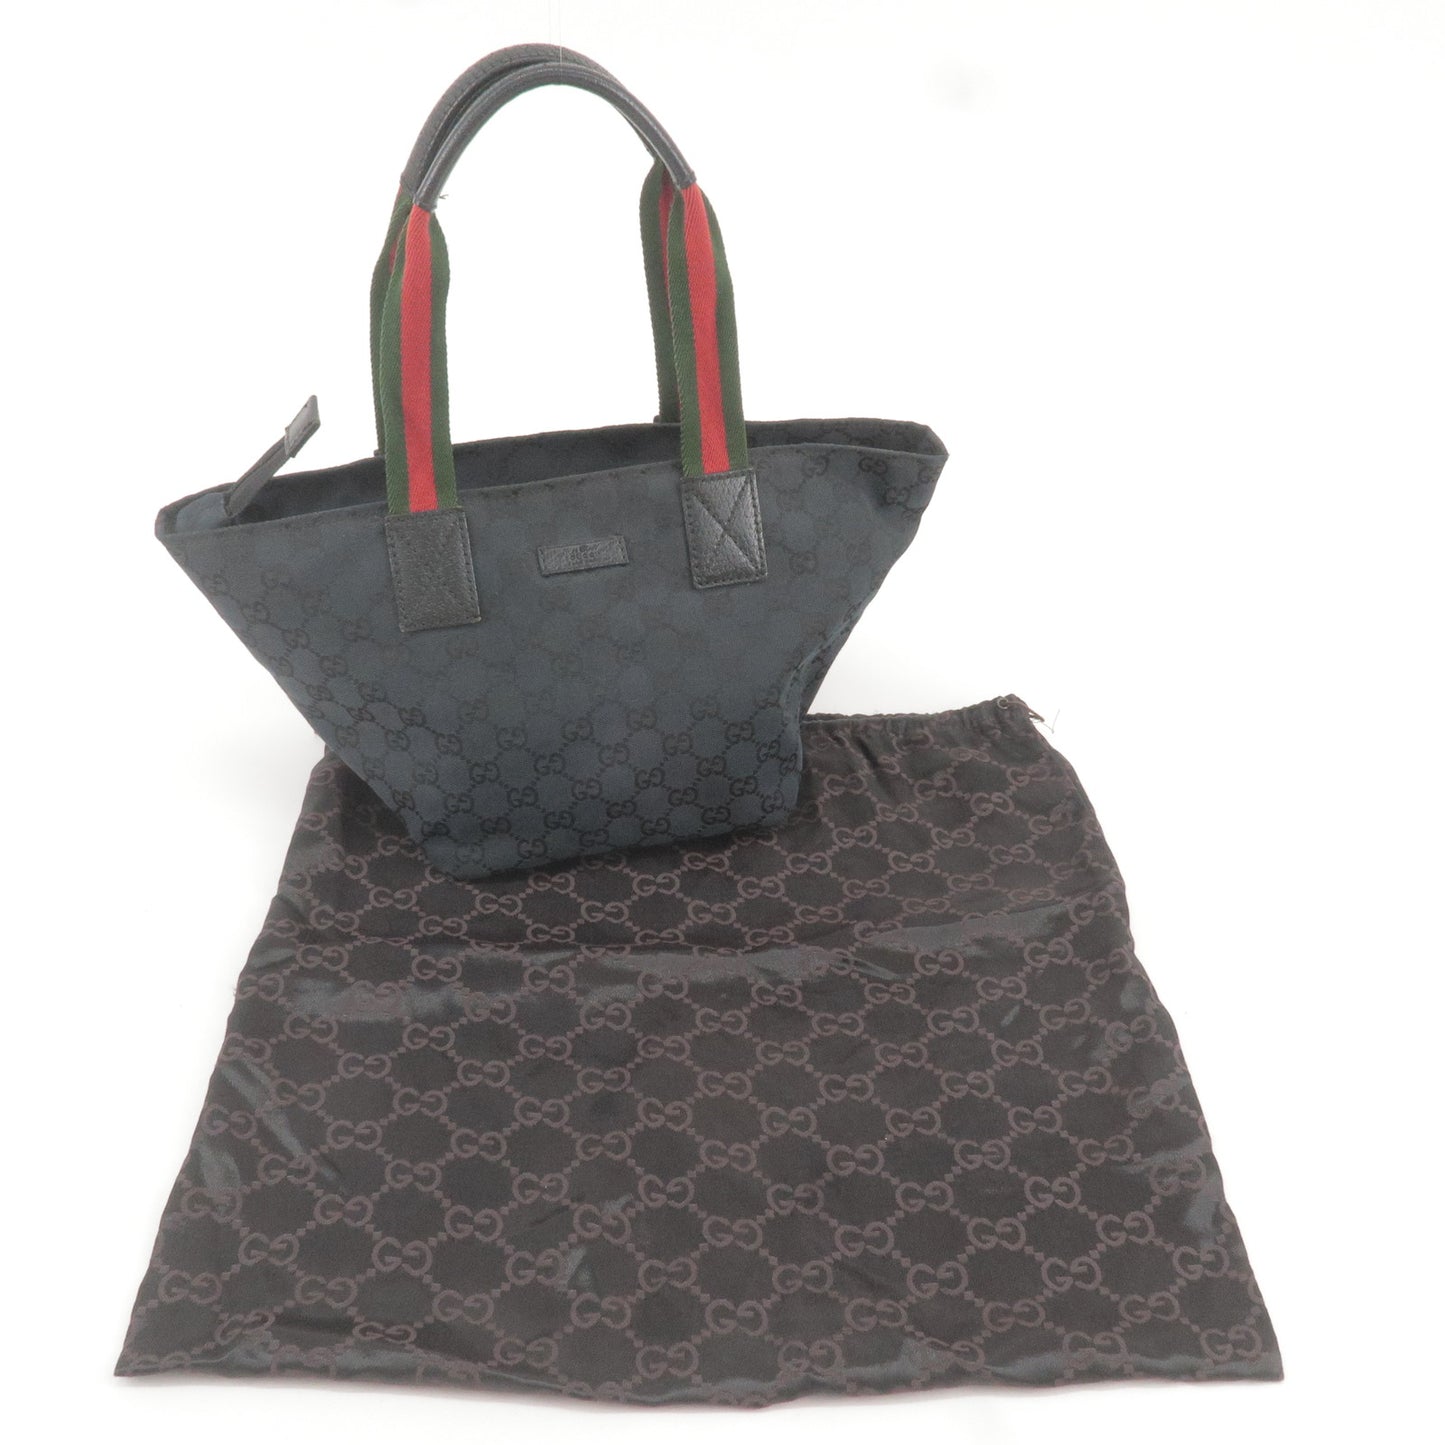 GUCCI Sherry GG Canvas Leather Tote Bag Black 131228